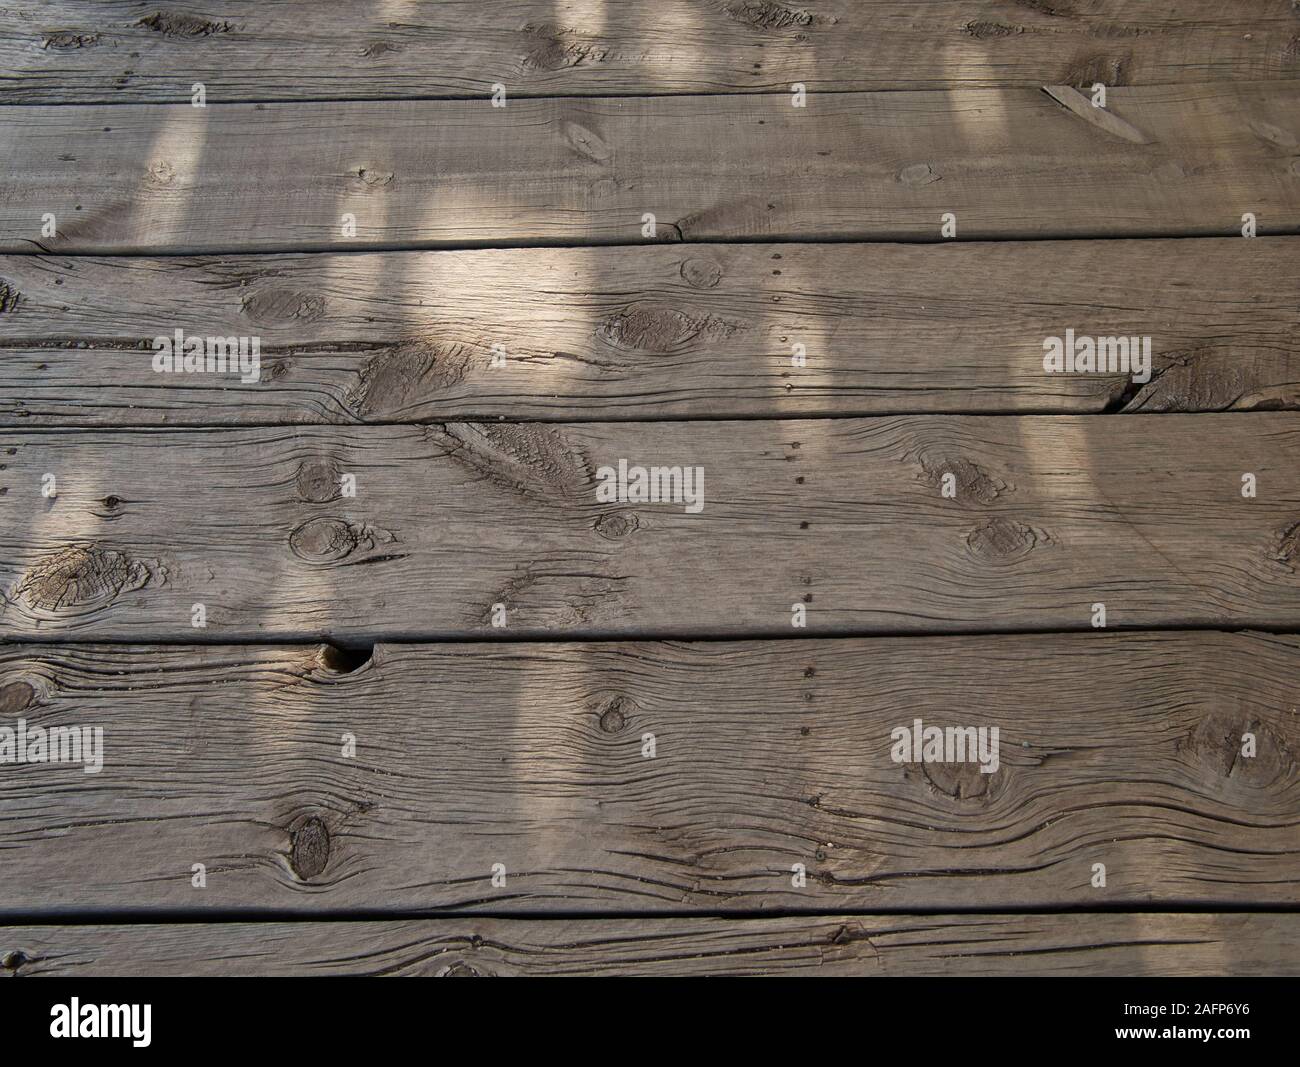 Untreated and weathered wooden beams on a very old veranda Stock Photo